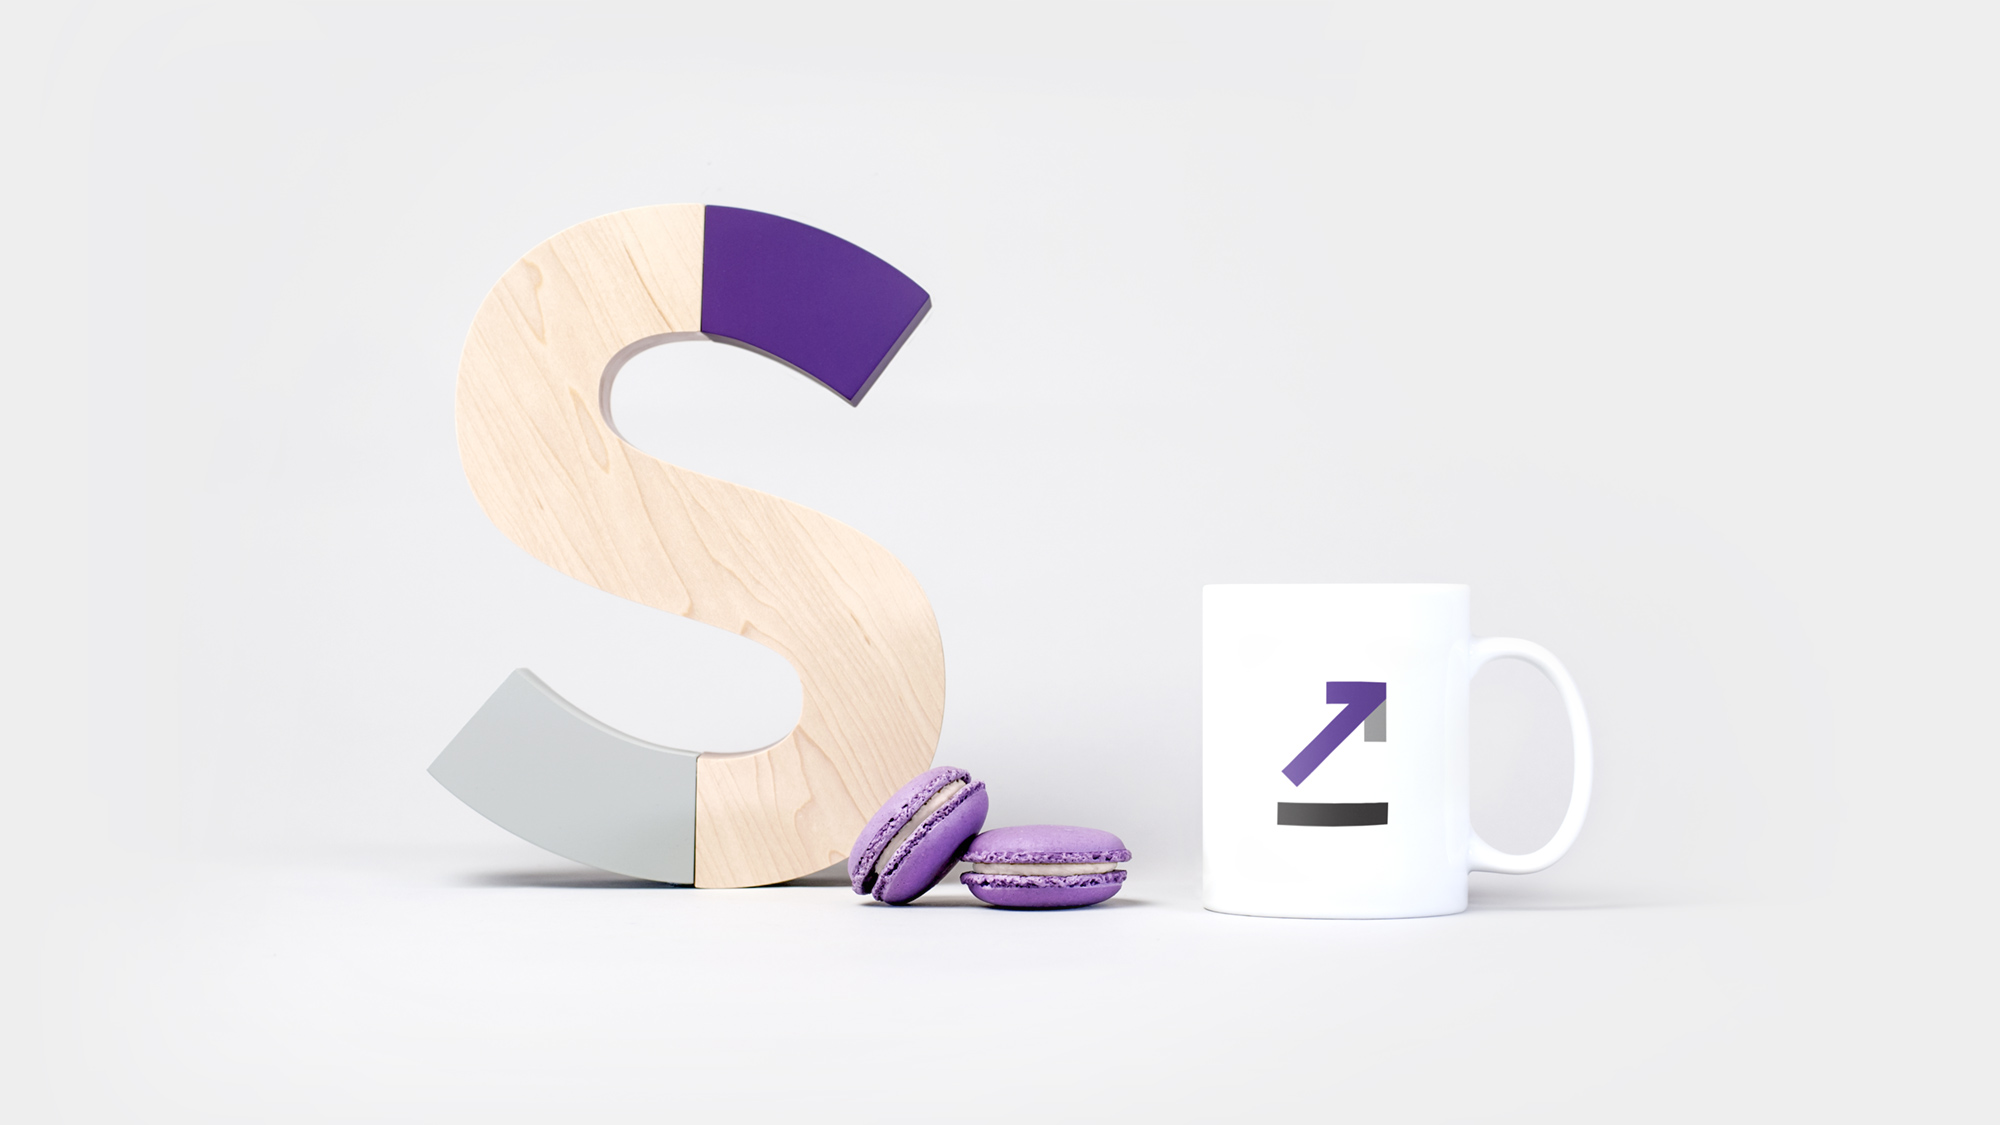 The Stride Property S logo made out of wood alongside a mug with an icon on it and two purple macarons